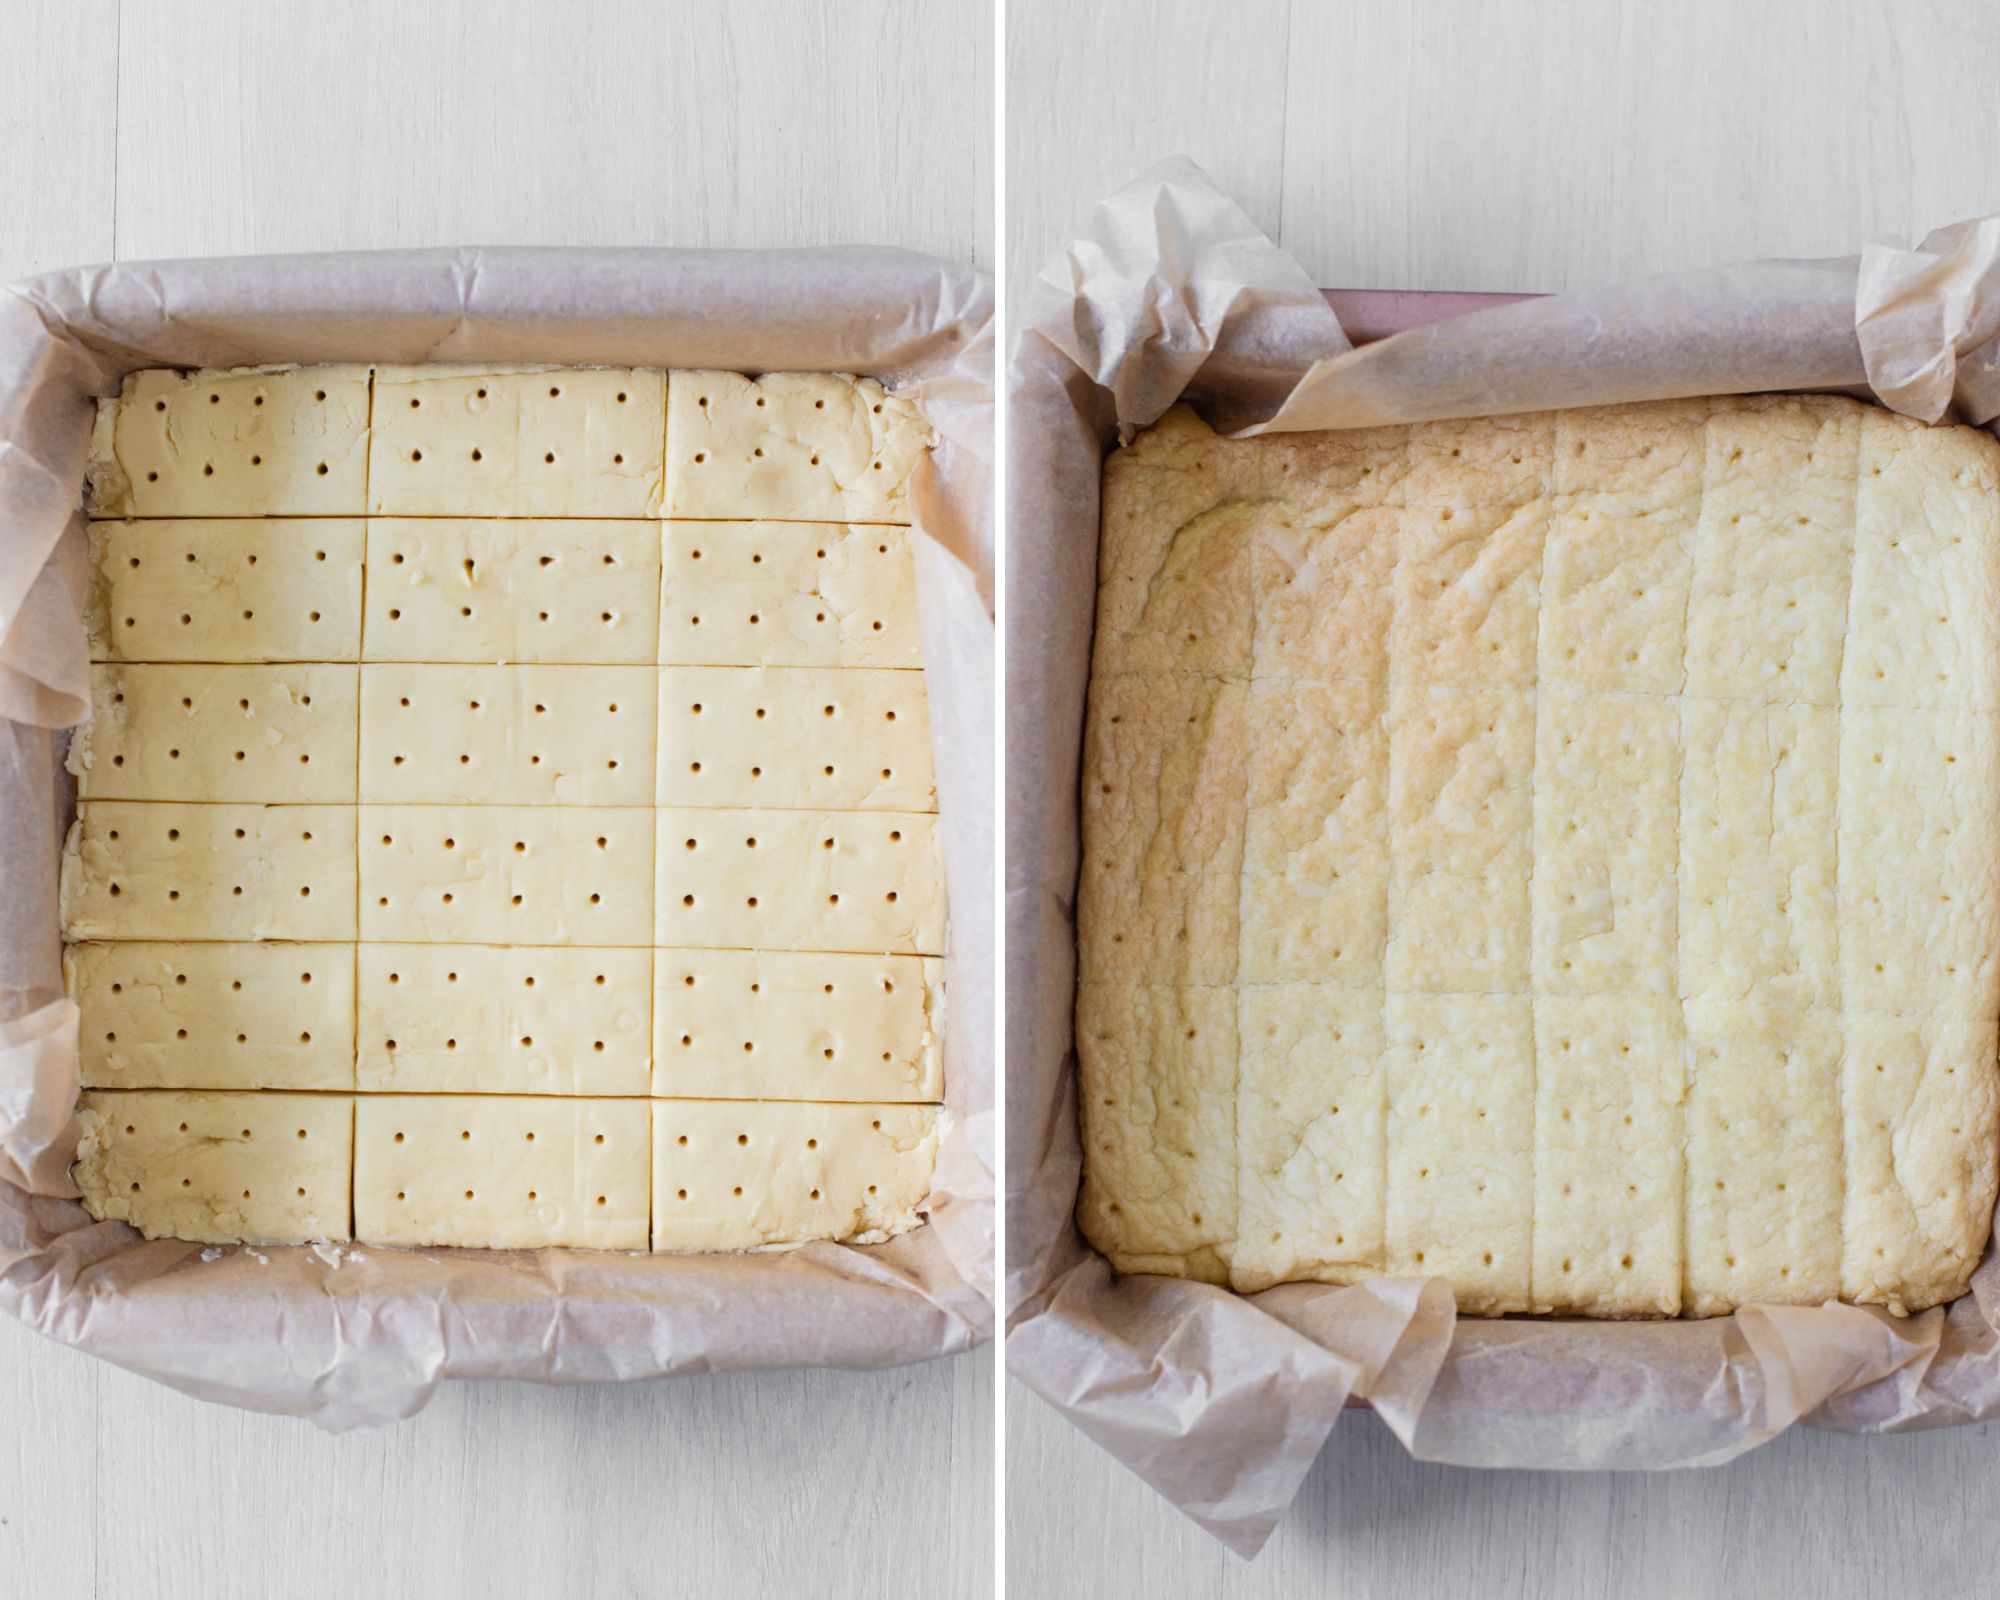 Shortbread biscuits in tin before and after baking.